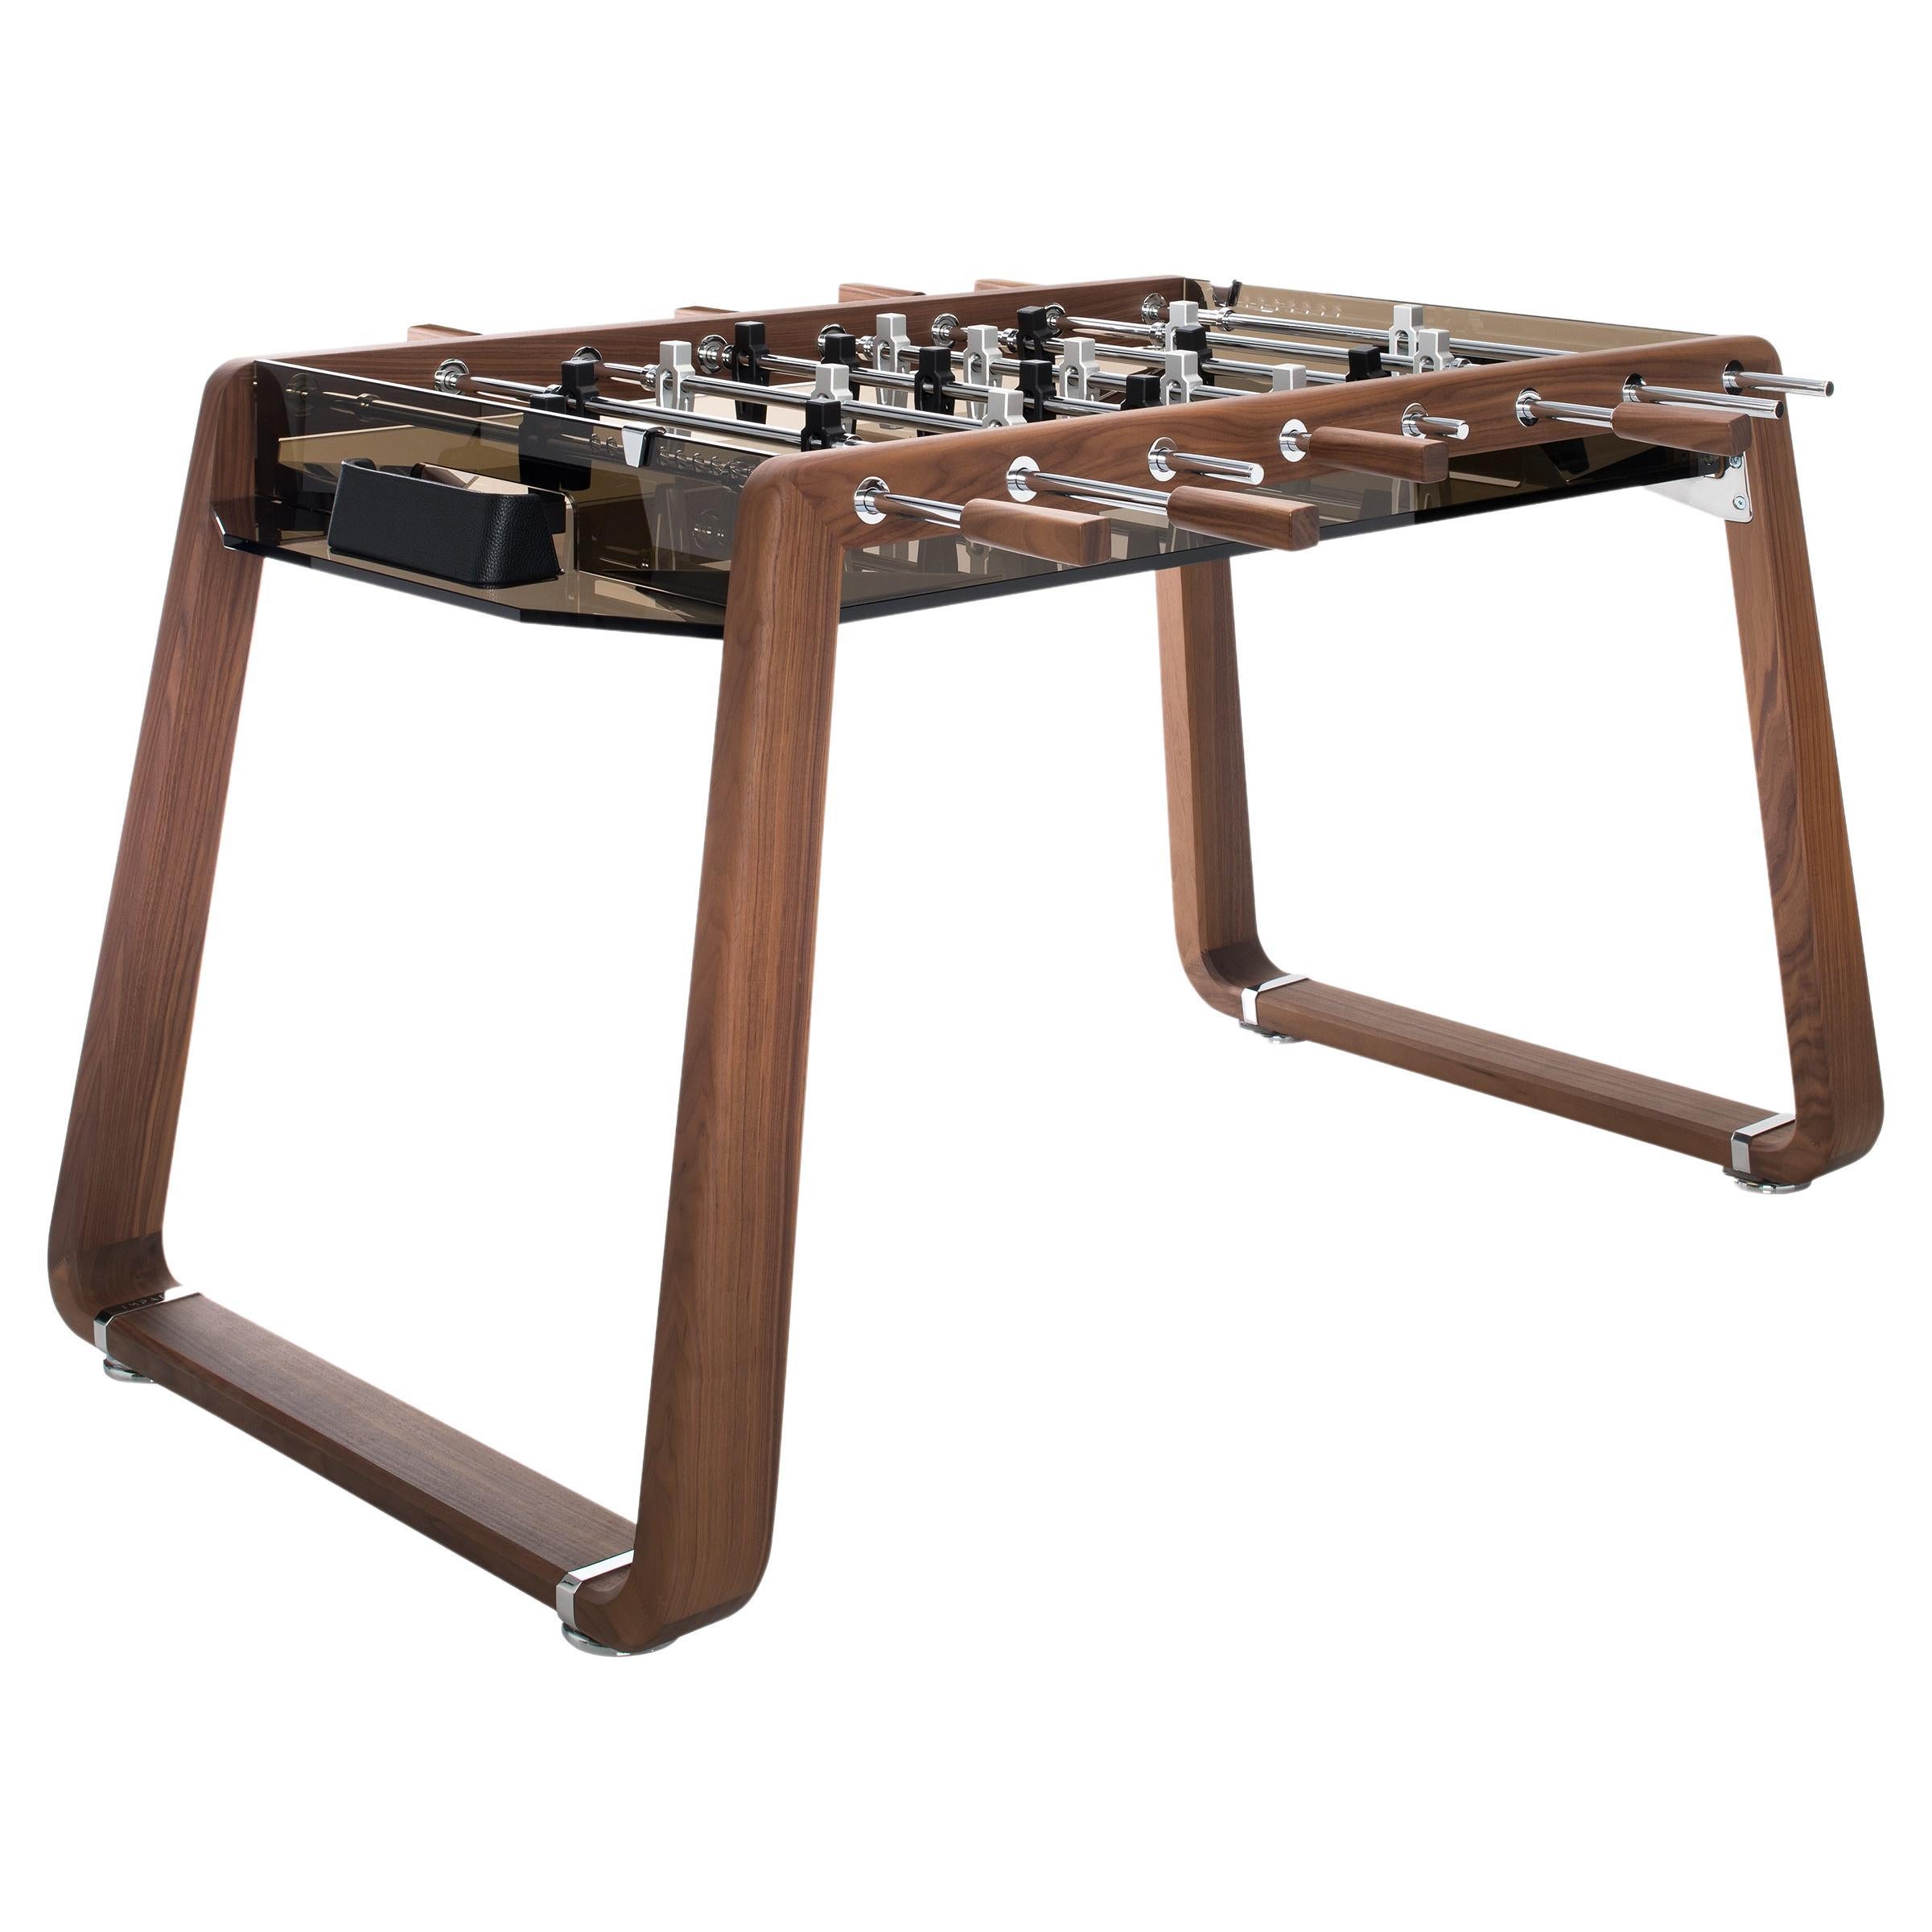 Contemporary Foosball Table with Walnut Wood and Bronze Glass by Impatia